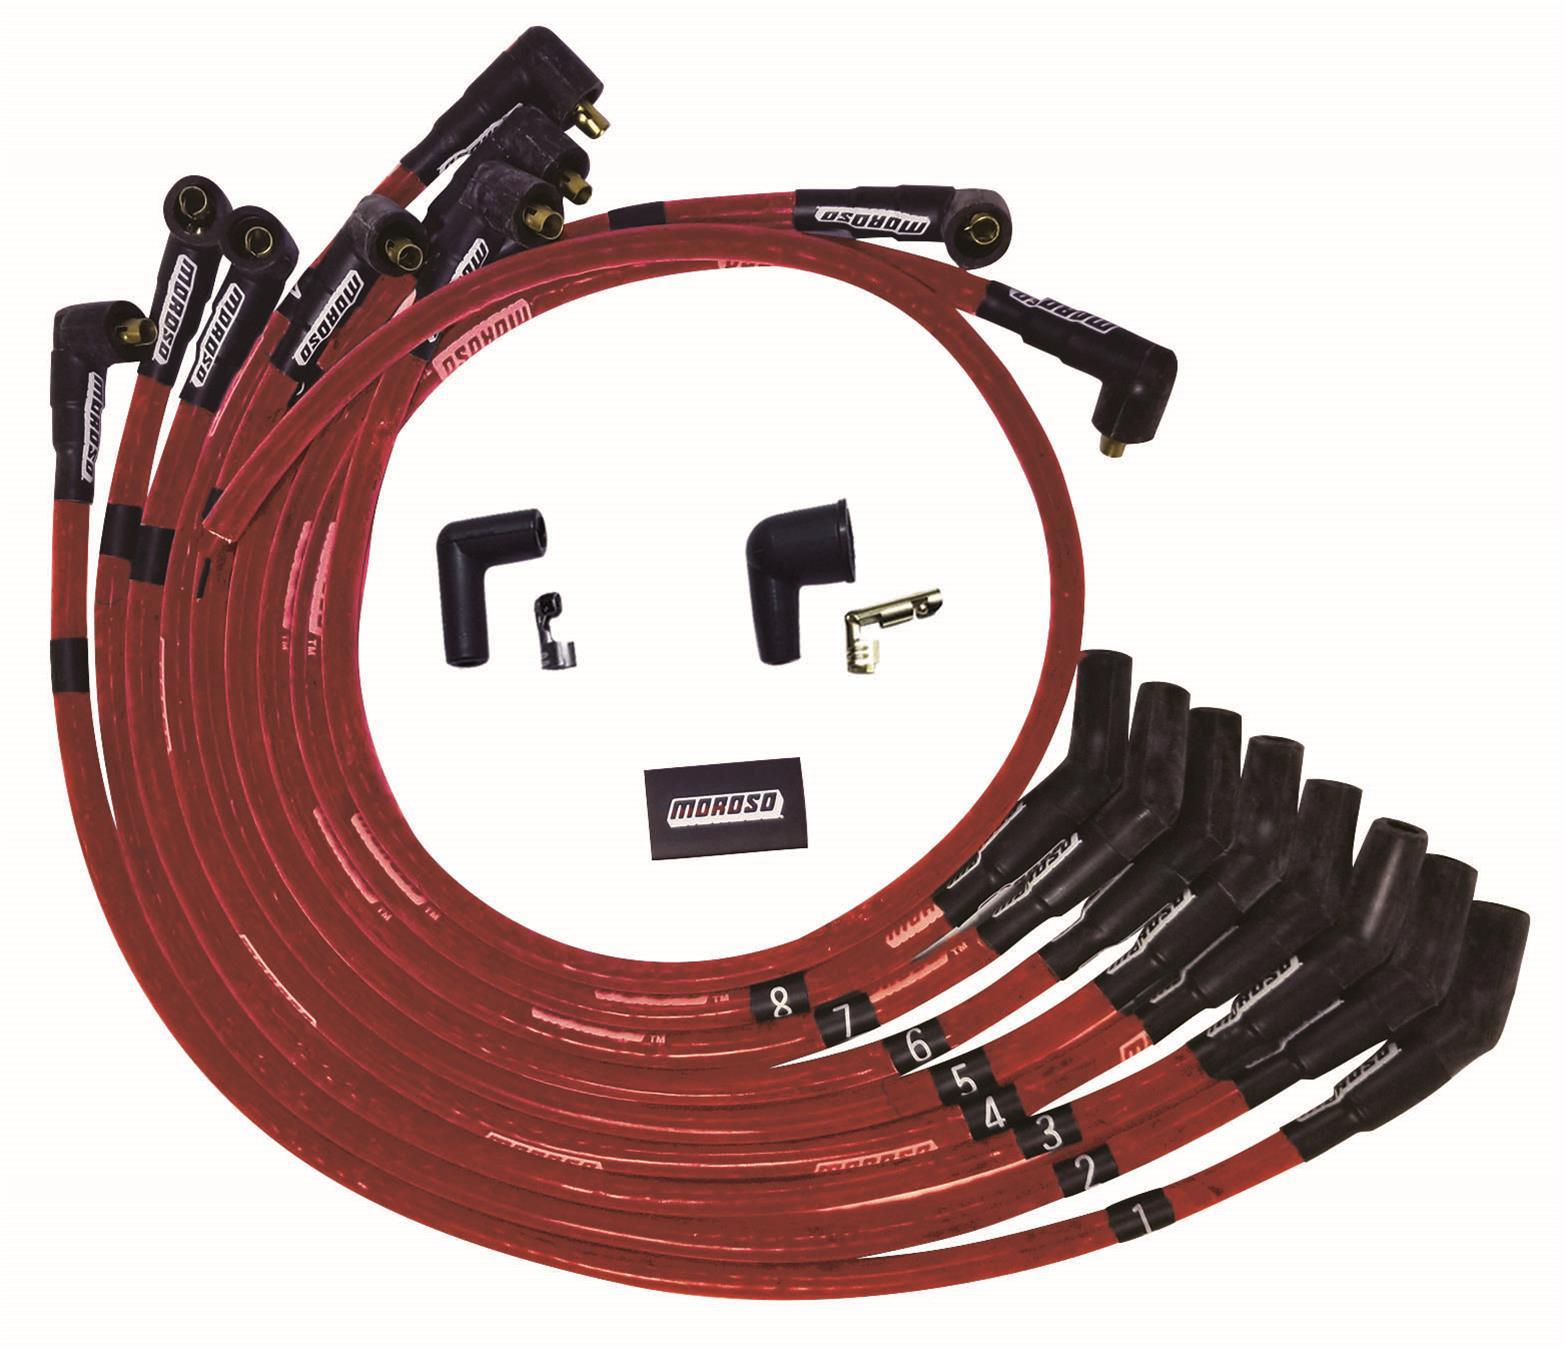 Moroso 52571 Spark Plug Wire Set, Ultra, Spiral Core, 8 mm, Sleeved, Red, 135 Degree Plug Boots, Socket Style, Small Block Ford, Kit